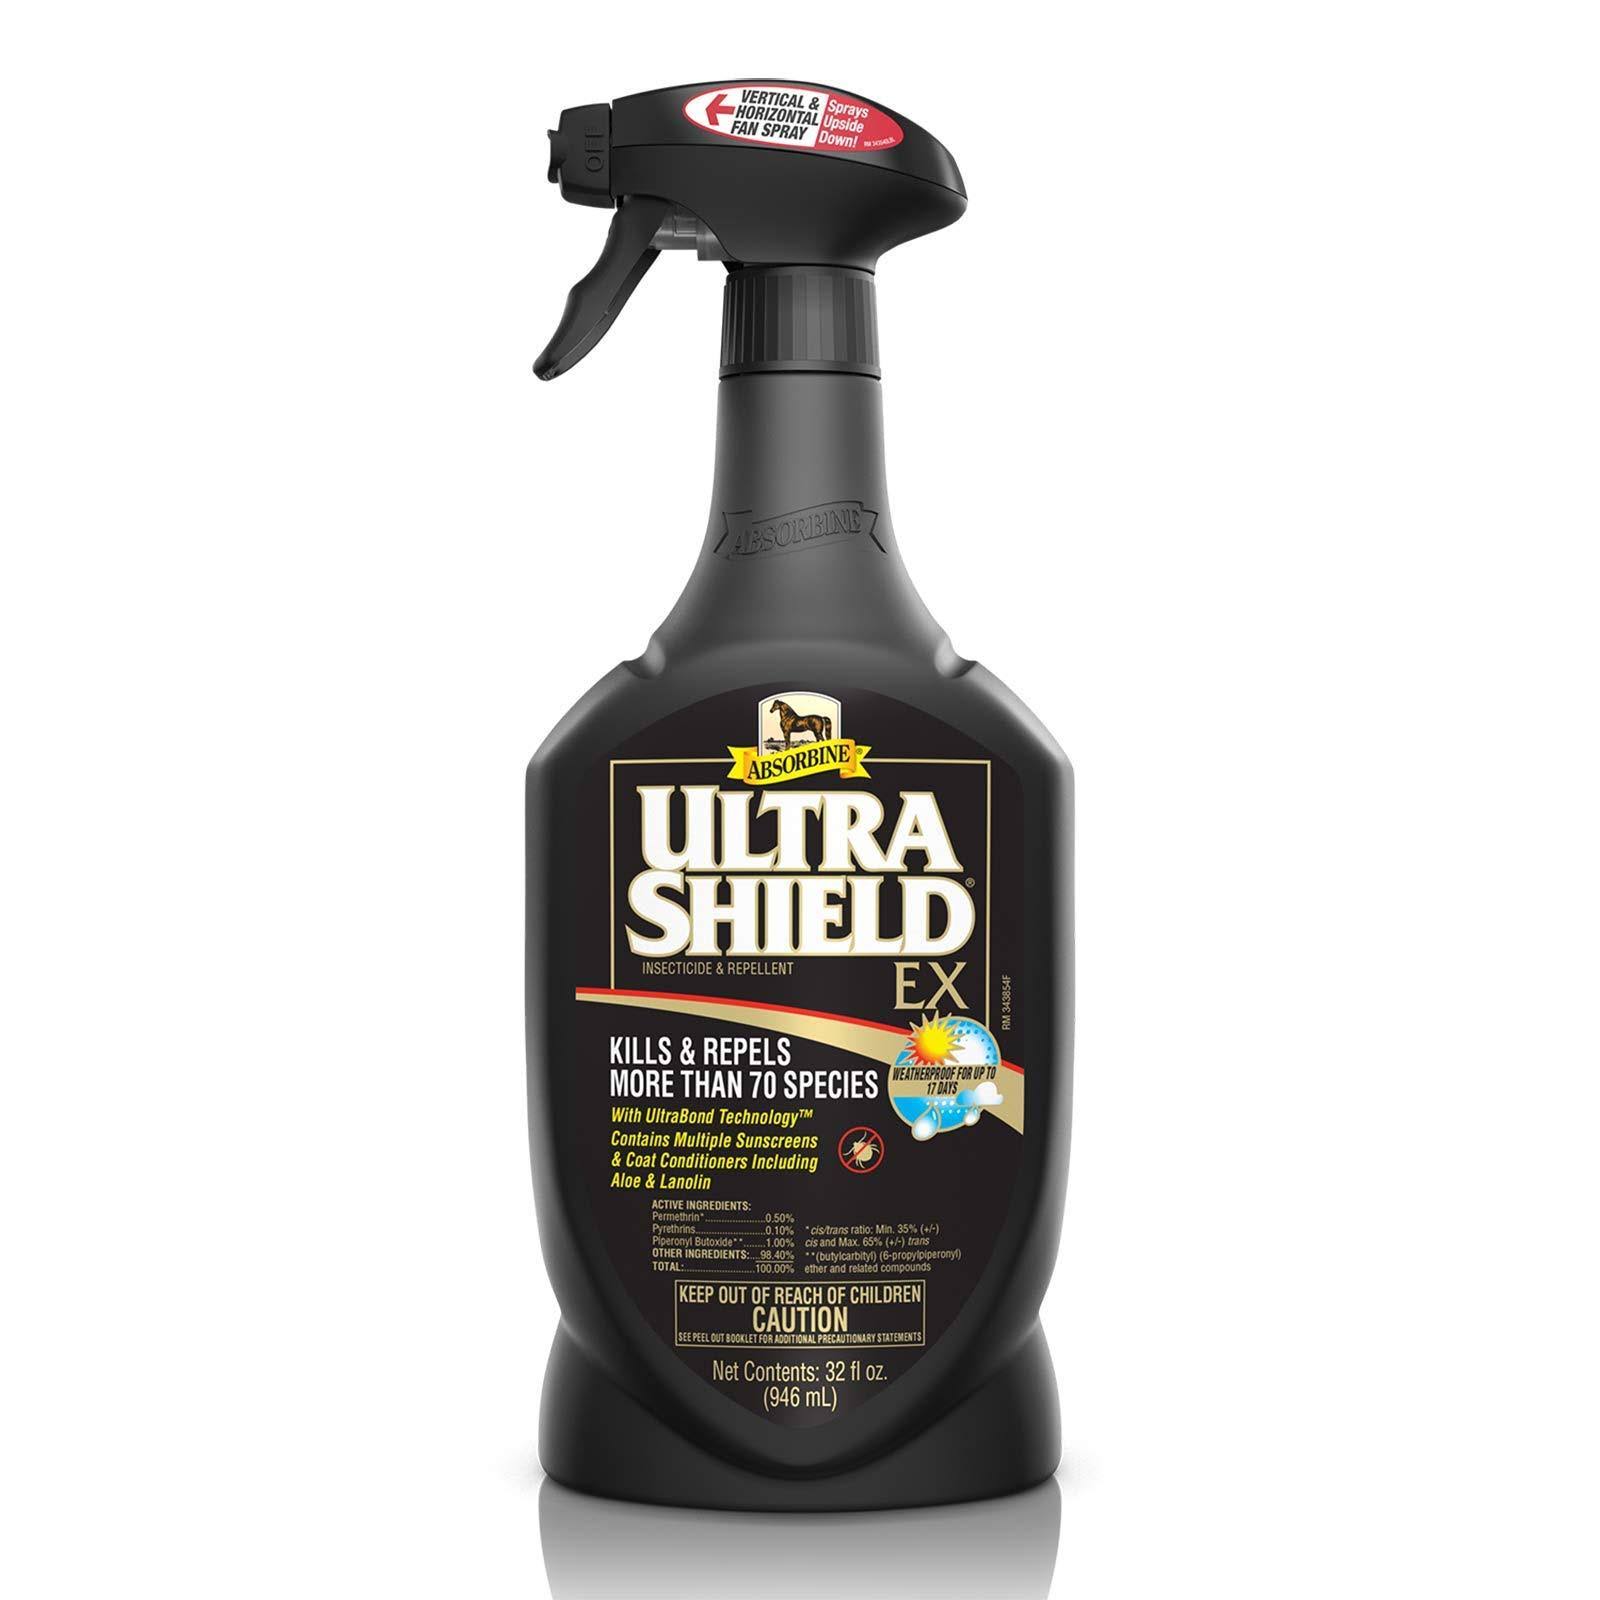 Absorbine Ultrashield Ex Residual Insecticide & Repellent